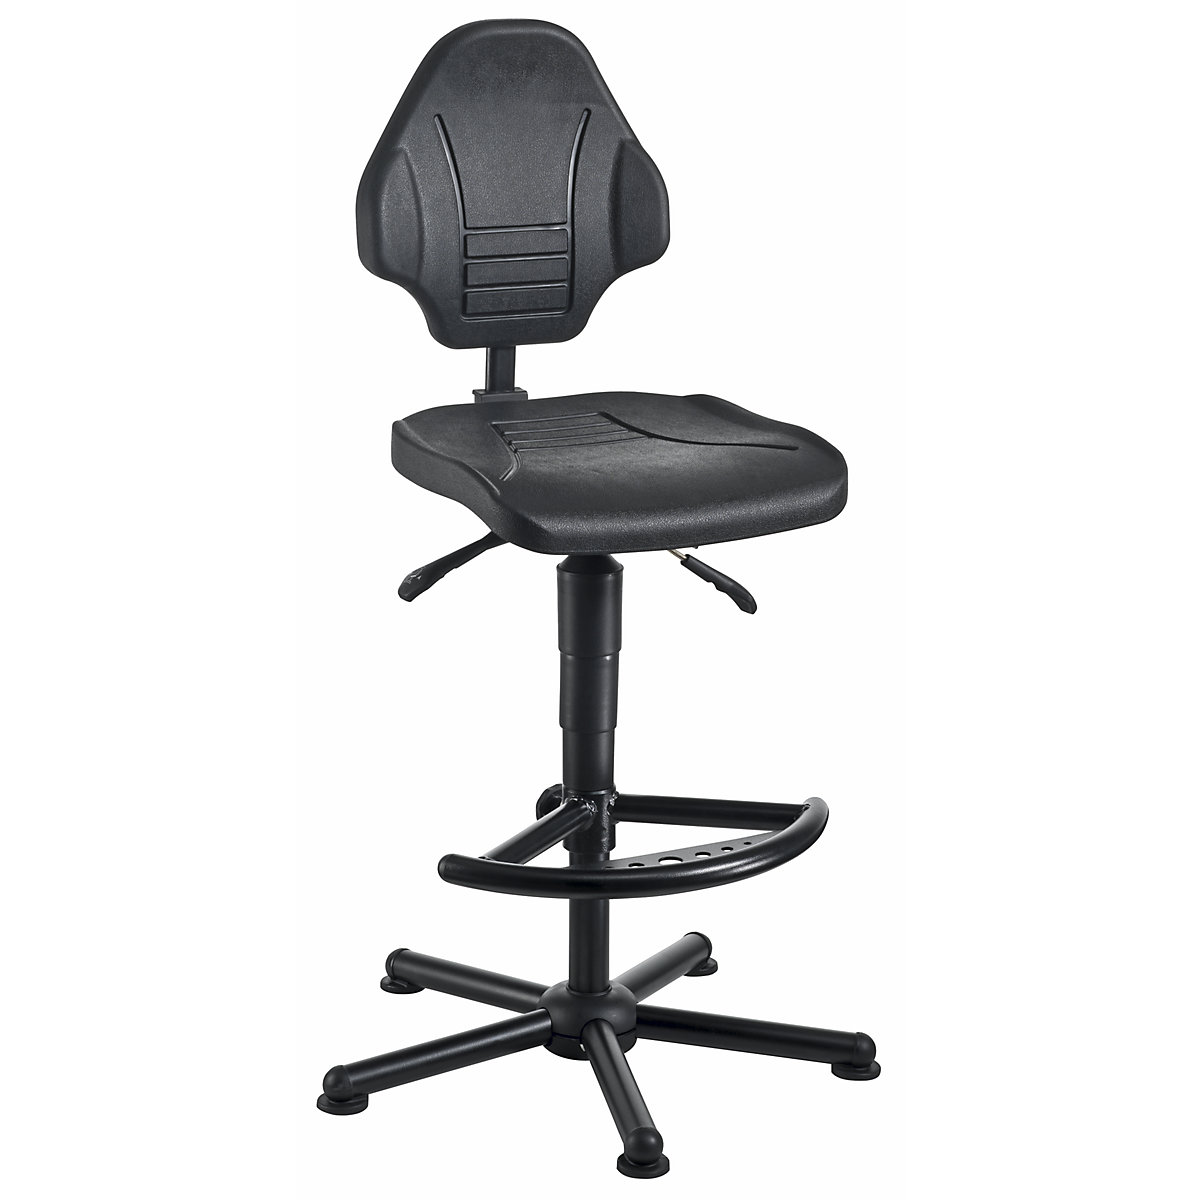 Heavy duty industrial swivel chair – meychair, max. load 160 kg, with floor glides and foot rest, height adjustment range 590 – 840 mm-3